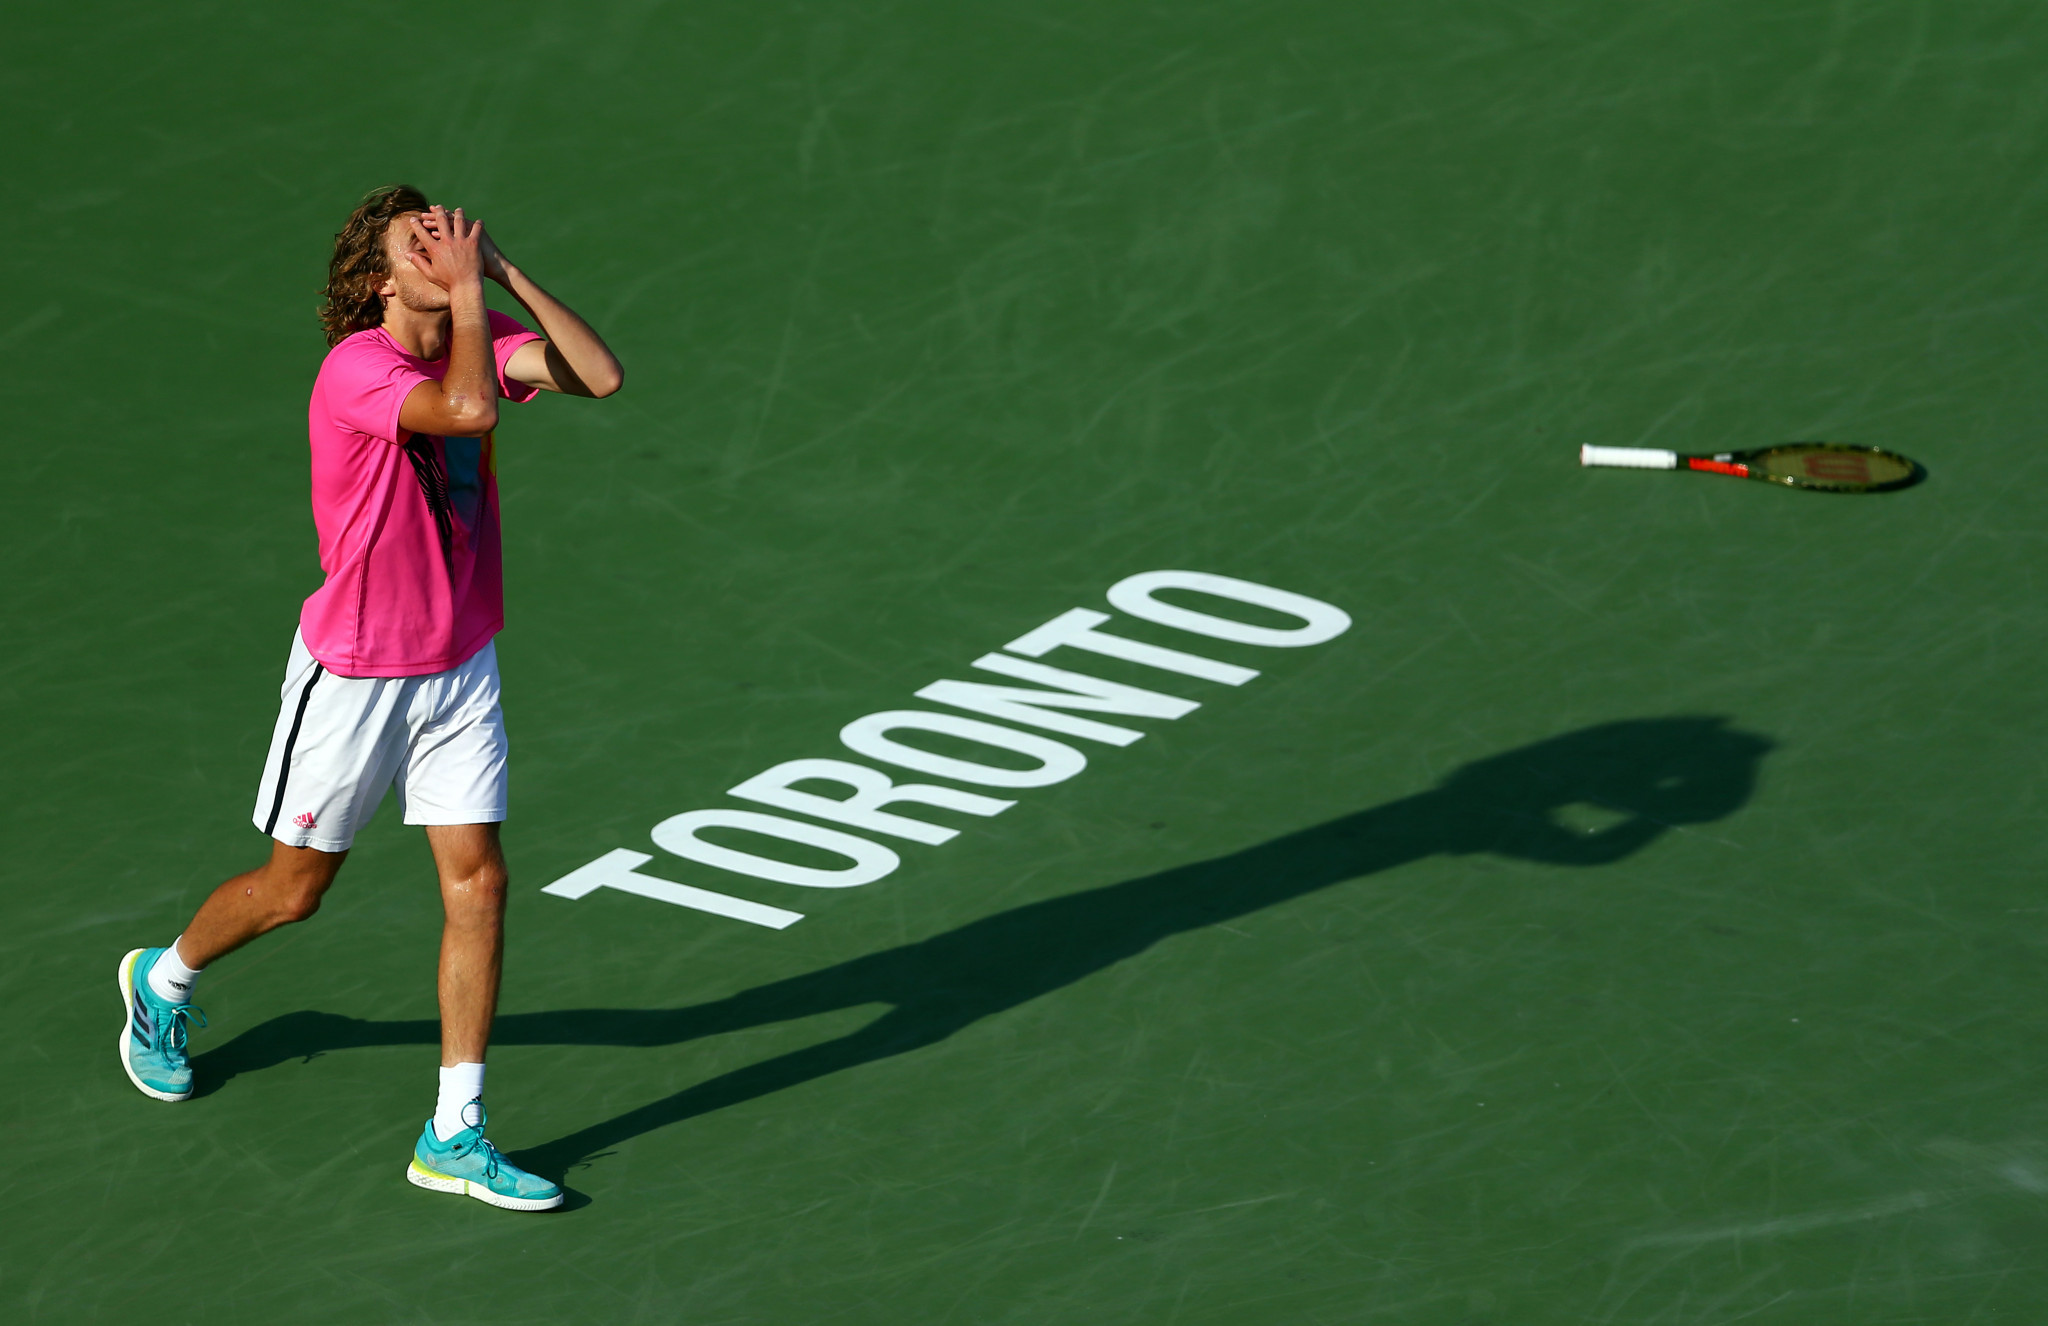 Stefanos Tsitsipas continued his giant-killing run at the Rogers Cup to reach the final ©Getty Images